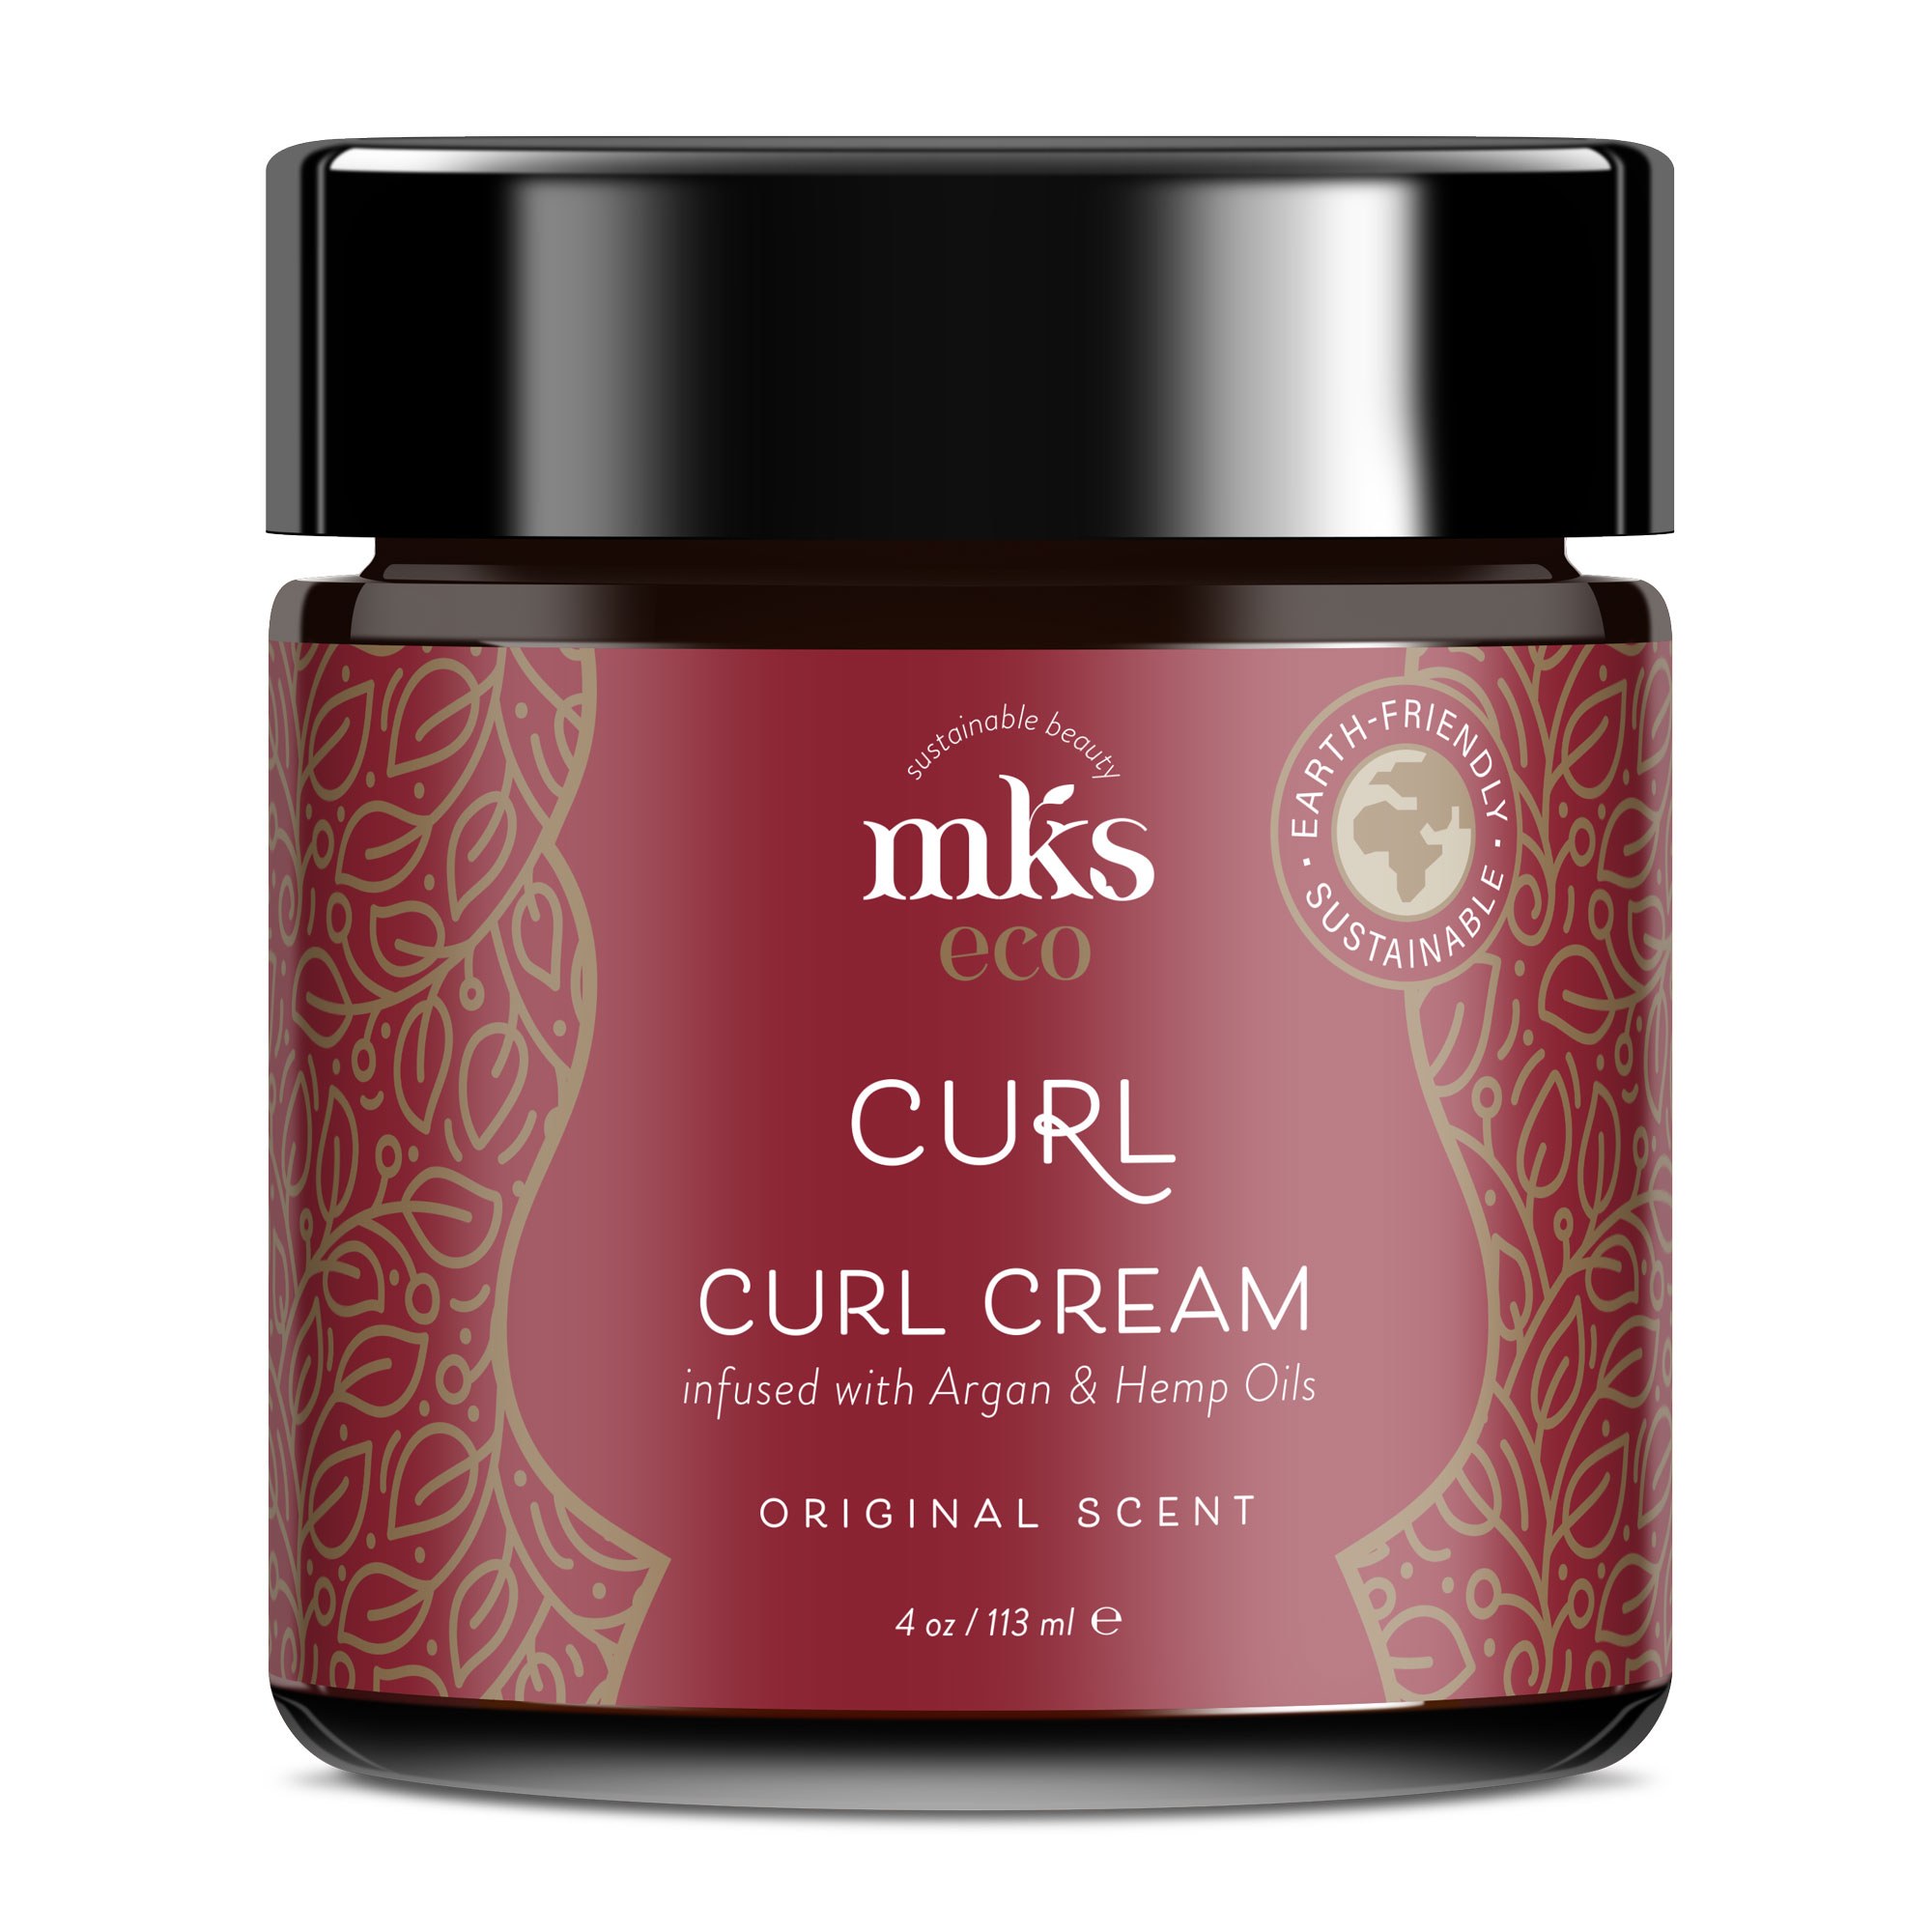 MKS eco Styling: Curl Curling Cream